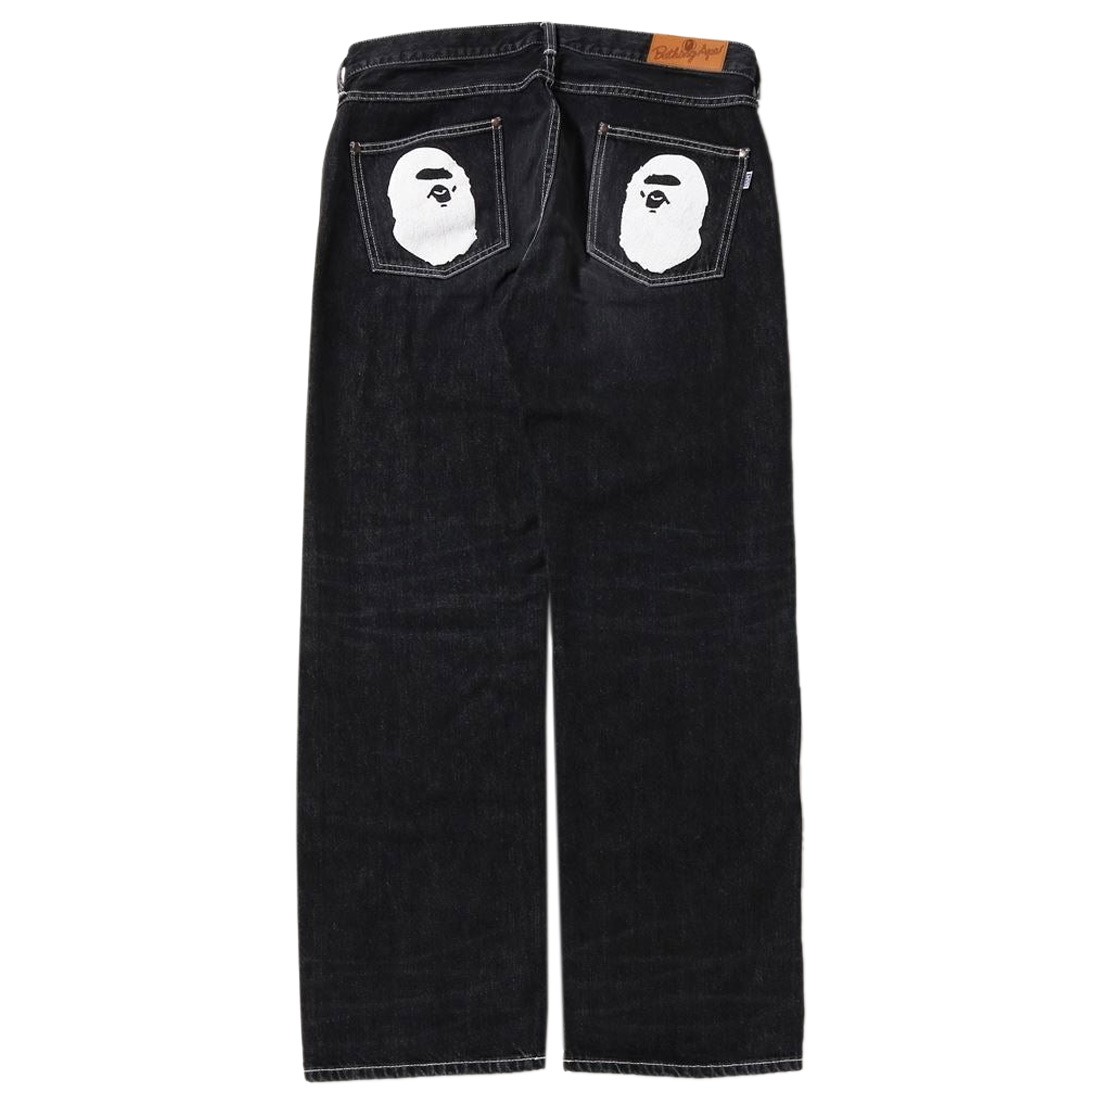 Hip Hop Retro Stardog Embroidered Selvedge Jeans Y2K Baggy Black Denim Pants  With Wide Leg And Straight Style For Fashionable Streetwear Style #230818  From Diao03, $20.12 | DHgate.Com